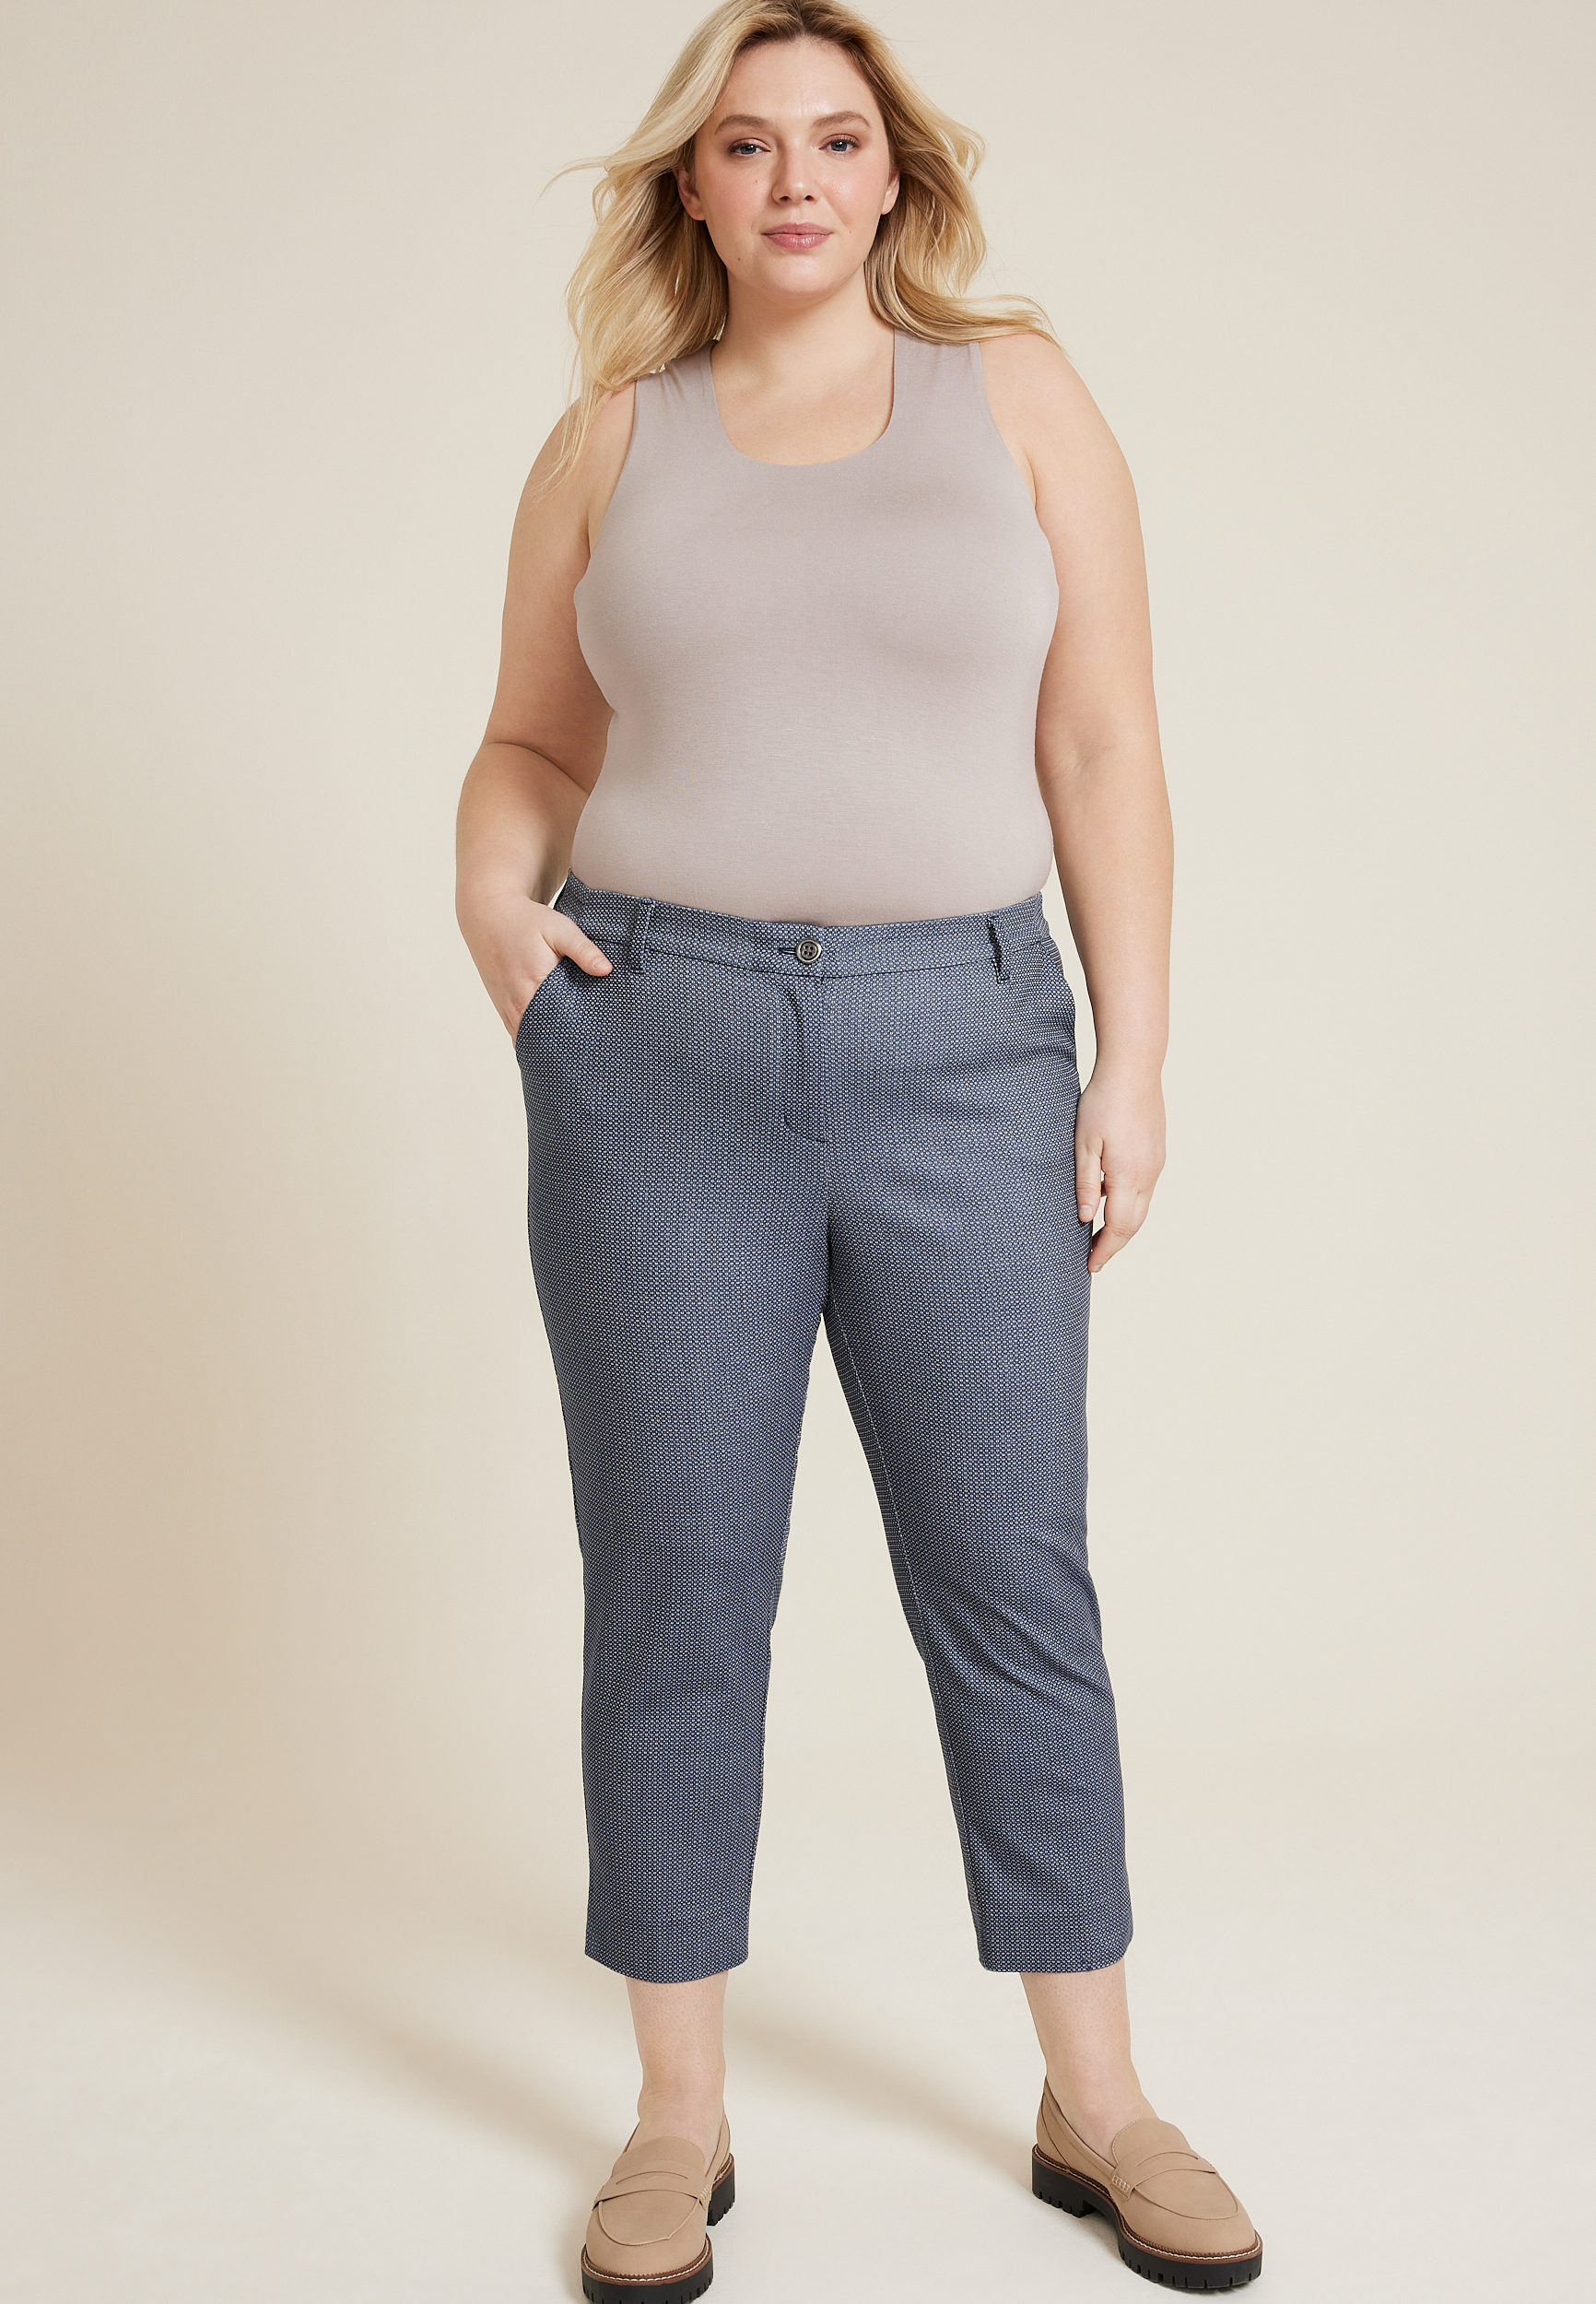 New Arrival Plus Size Clothing For Women: Tops, Pants & More